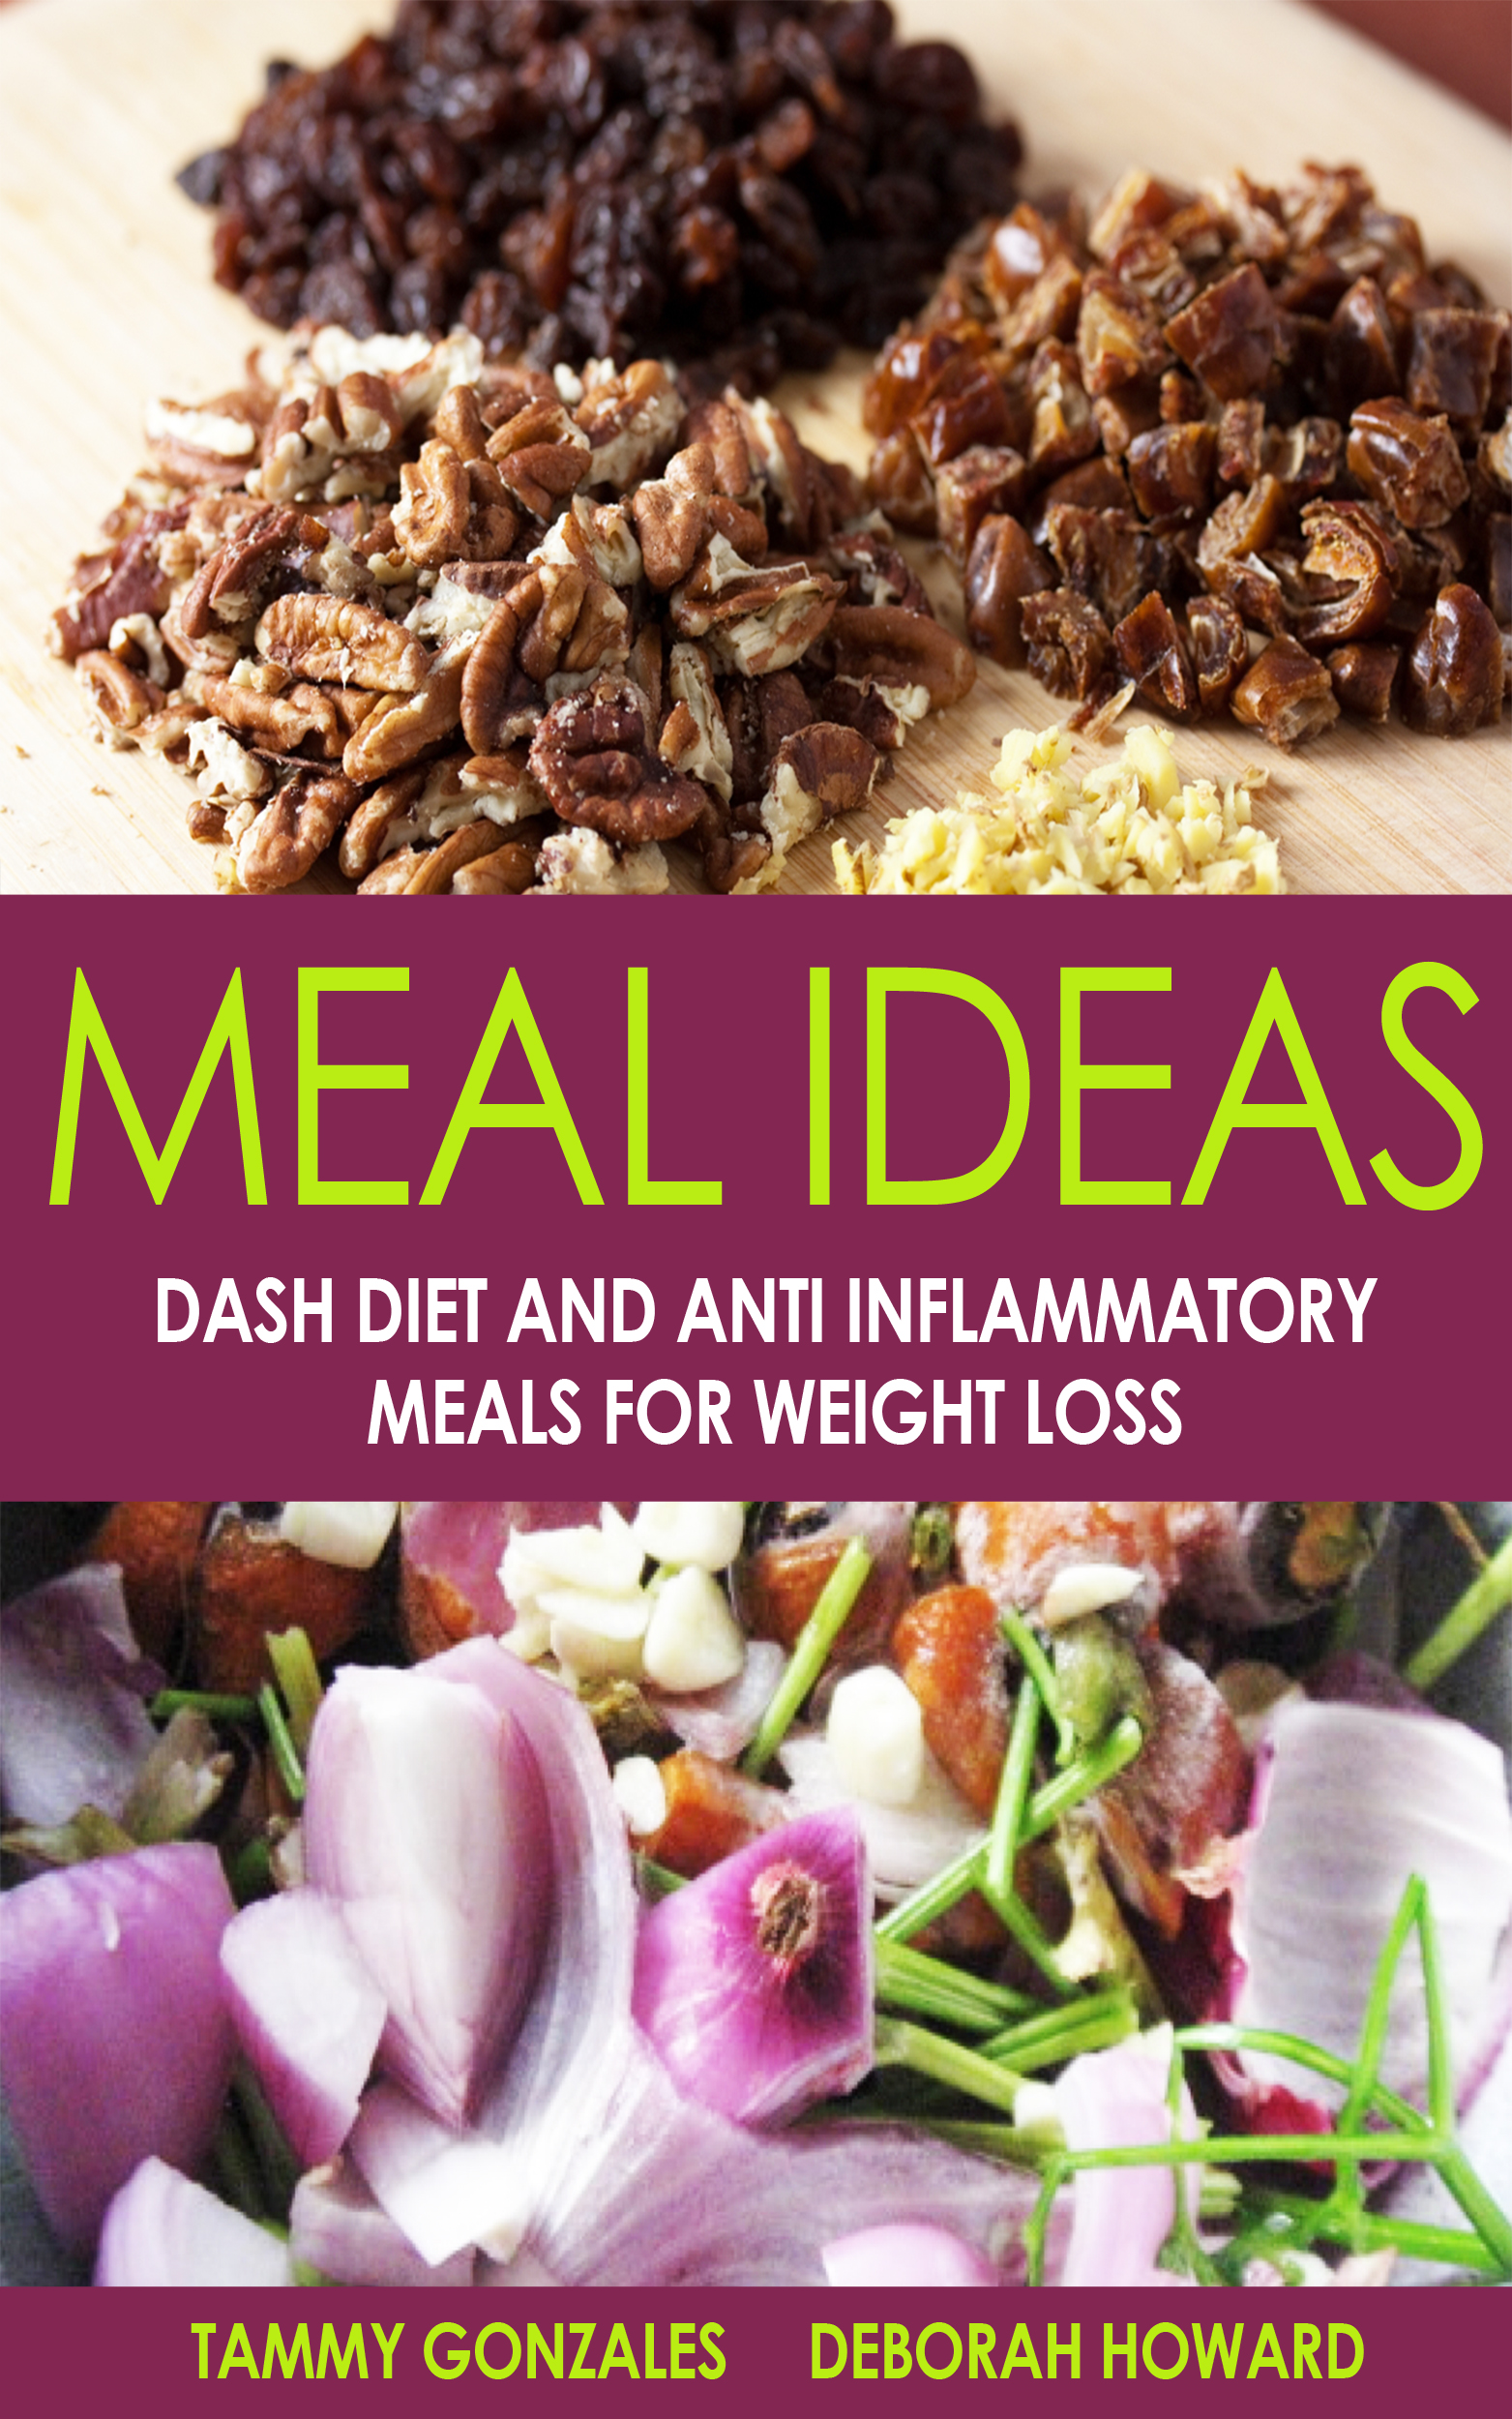 Table of Contents Meal Ideas DASH Diet and Anti Inflammatory Meals for - photo 1